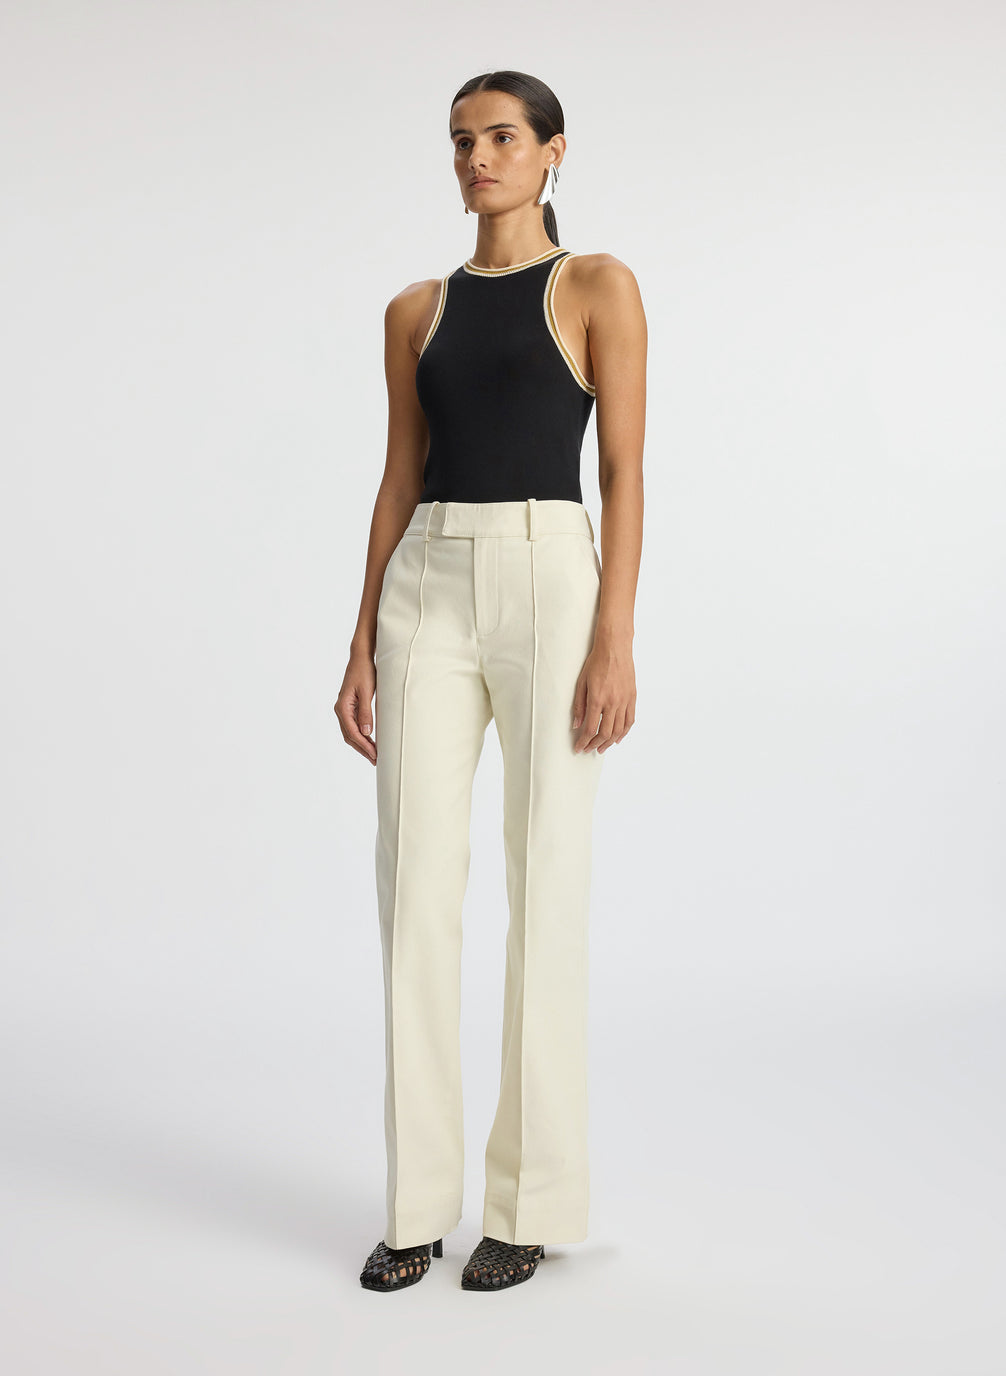 side view of woman wearing black tank top with contrast trim and cream pants